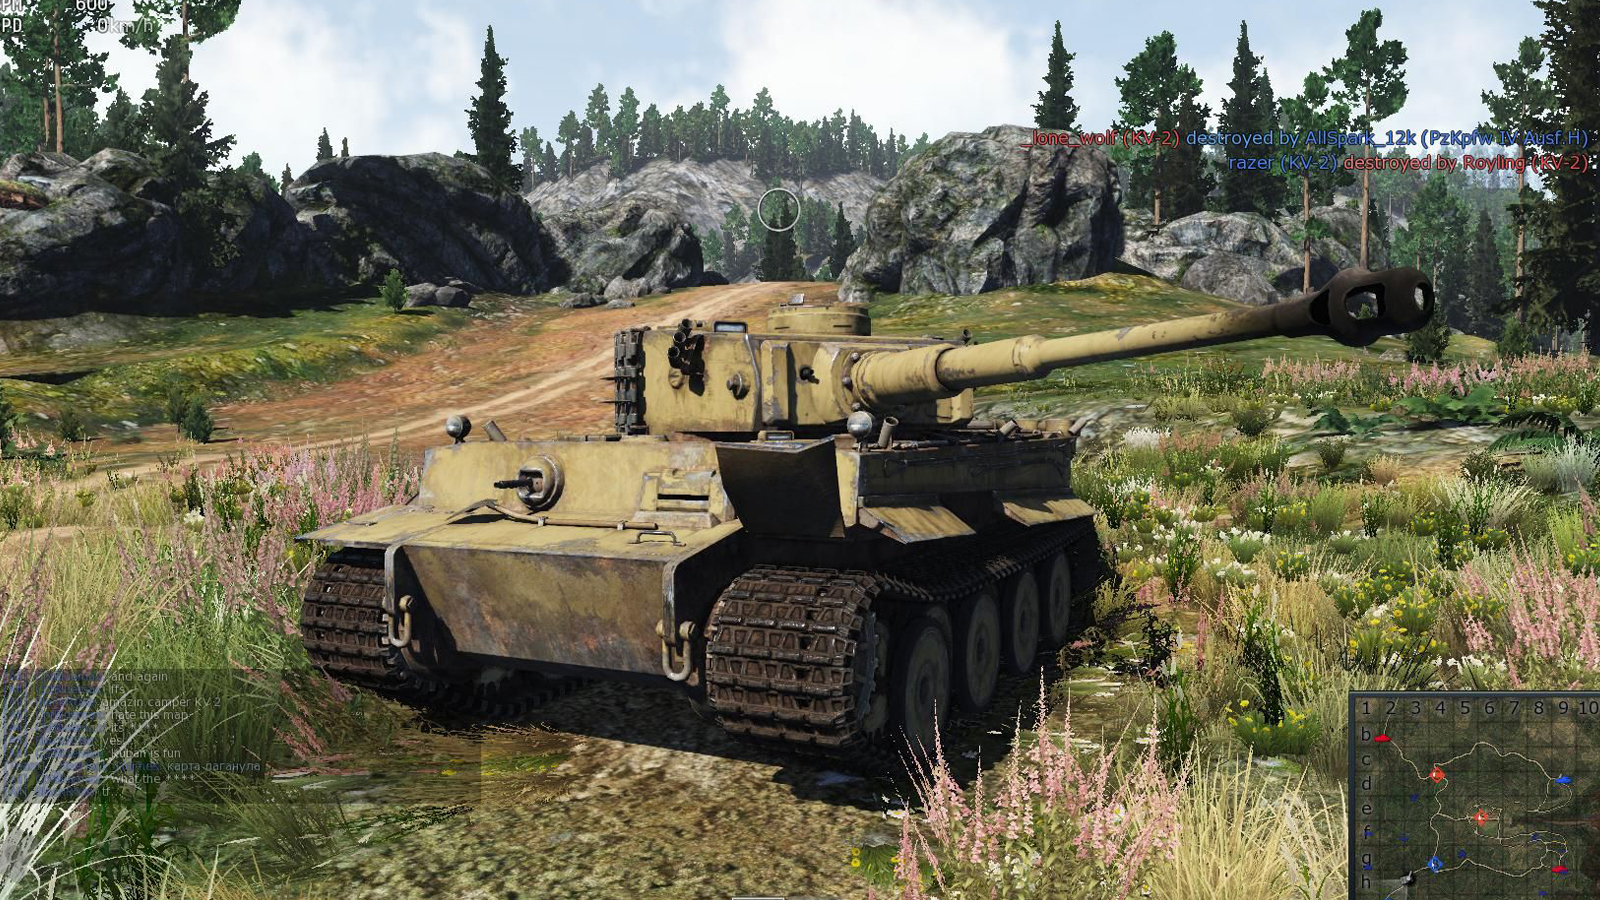 Many of the tanks in War Thunder Ground Forces have large ammo capacities. 